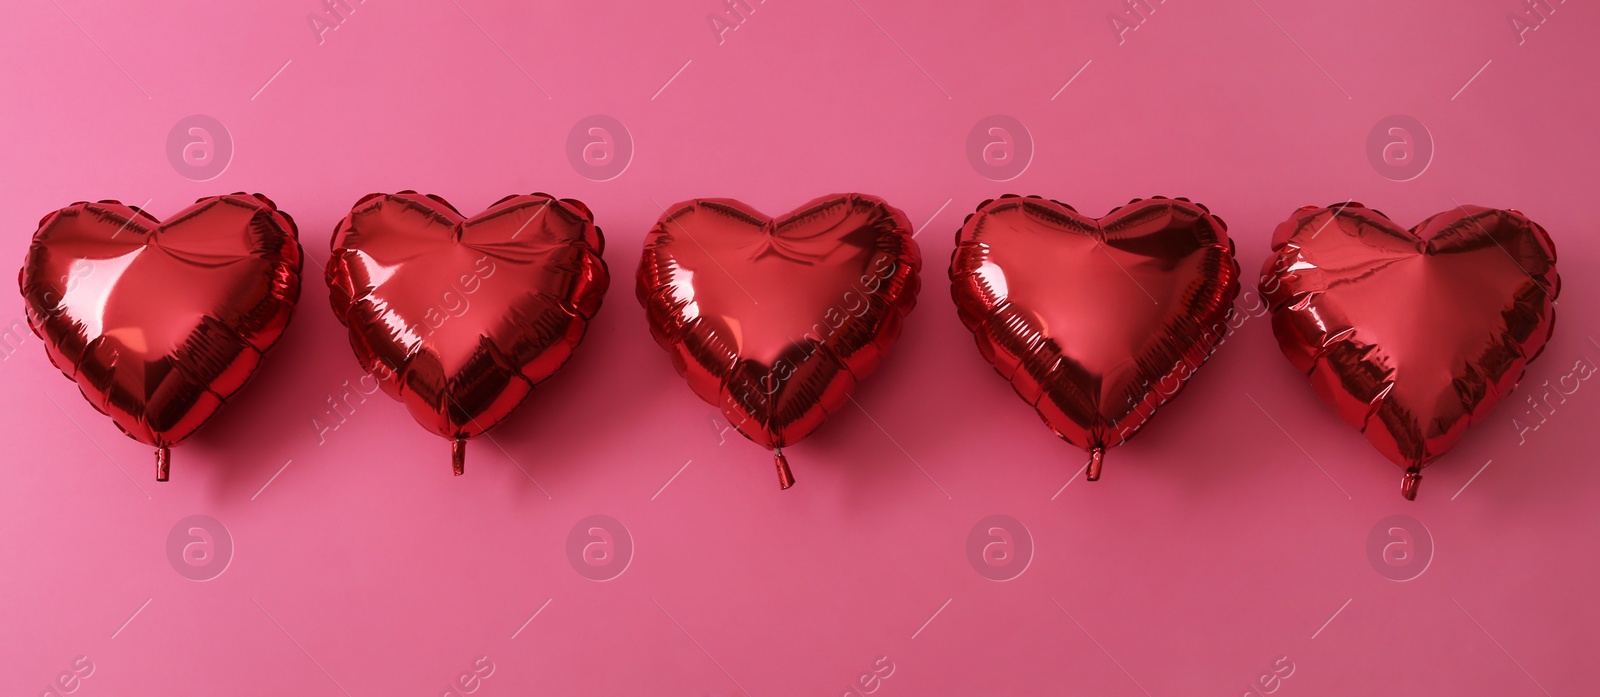 Photo of Red heart shaped balloons on pink background, flat lay. Saint Valentine's day celebration